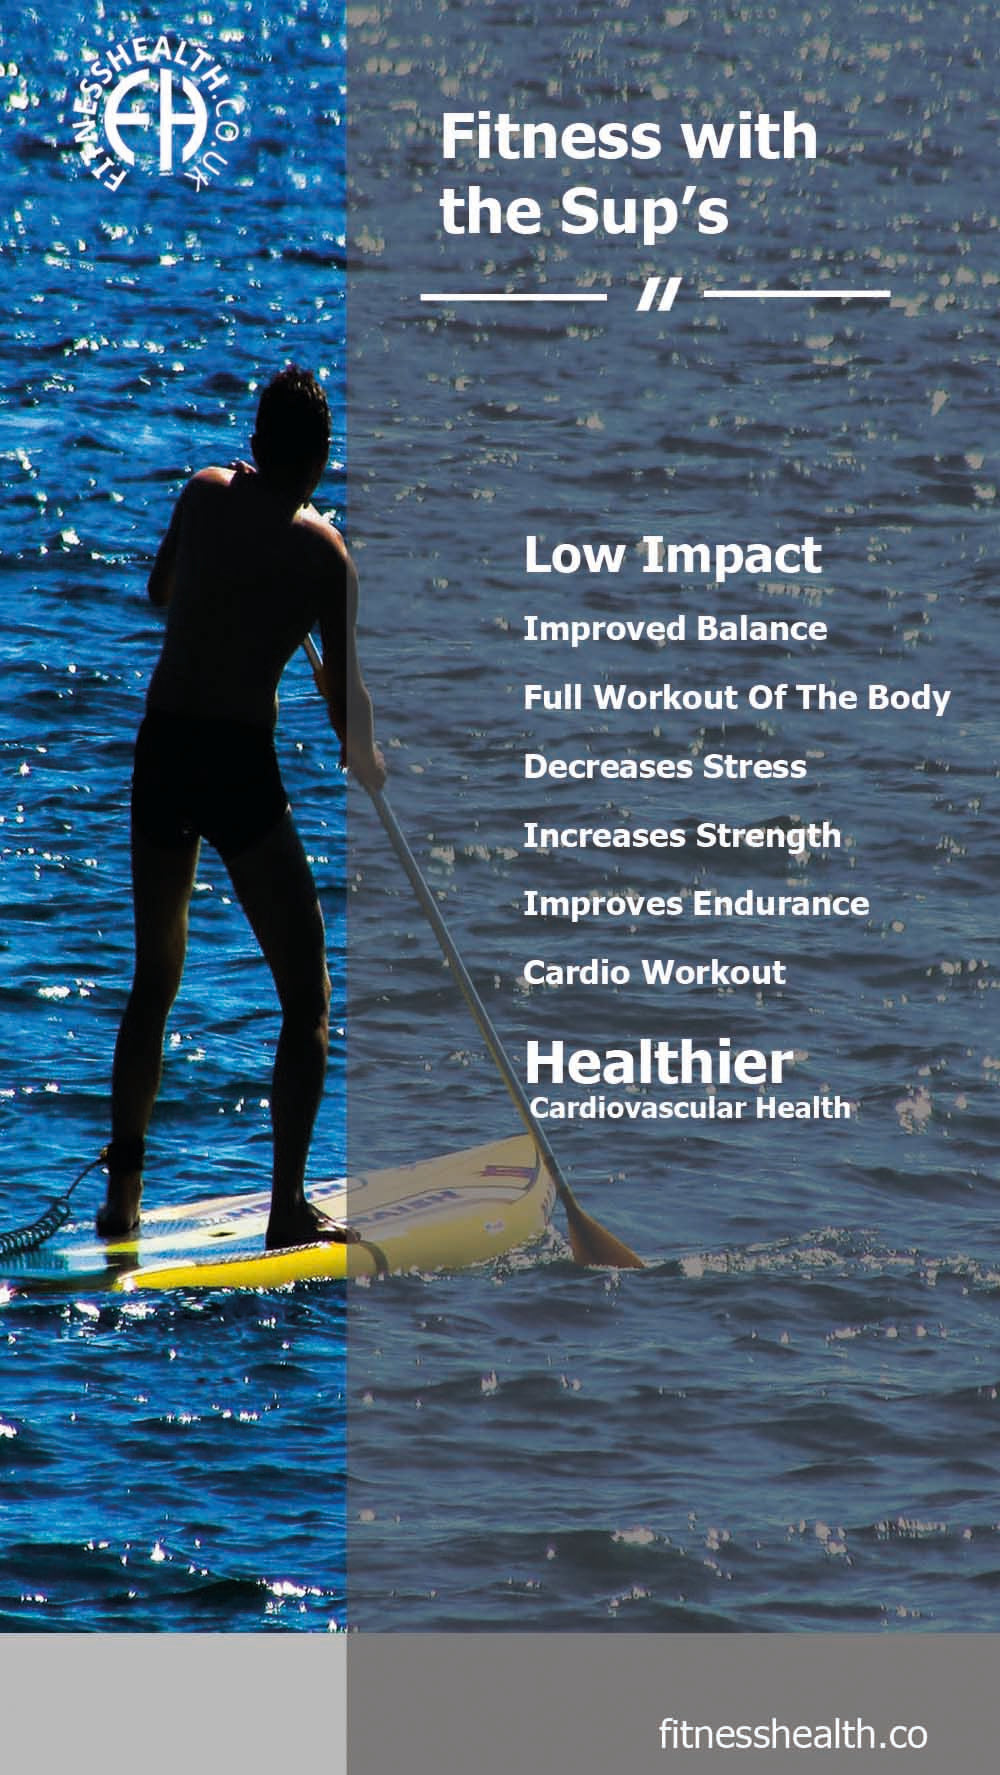 Fitness with the SUP (Stand up paddle boards) - Fitness Health 